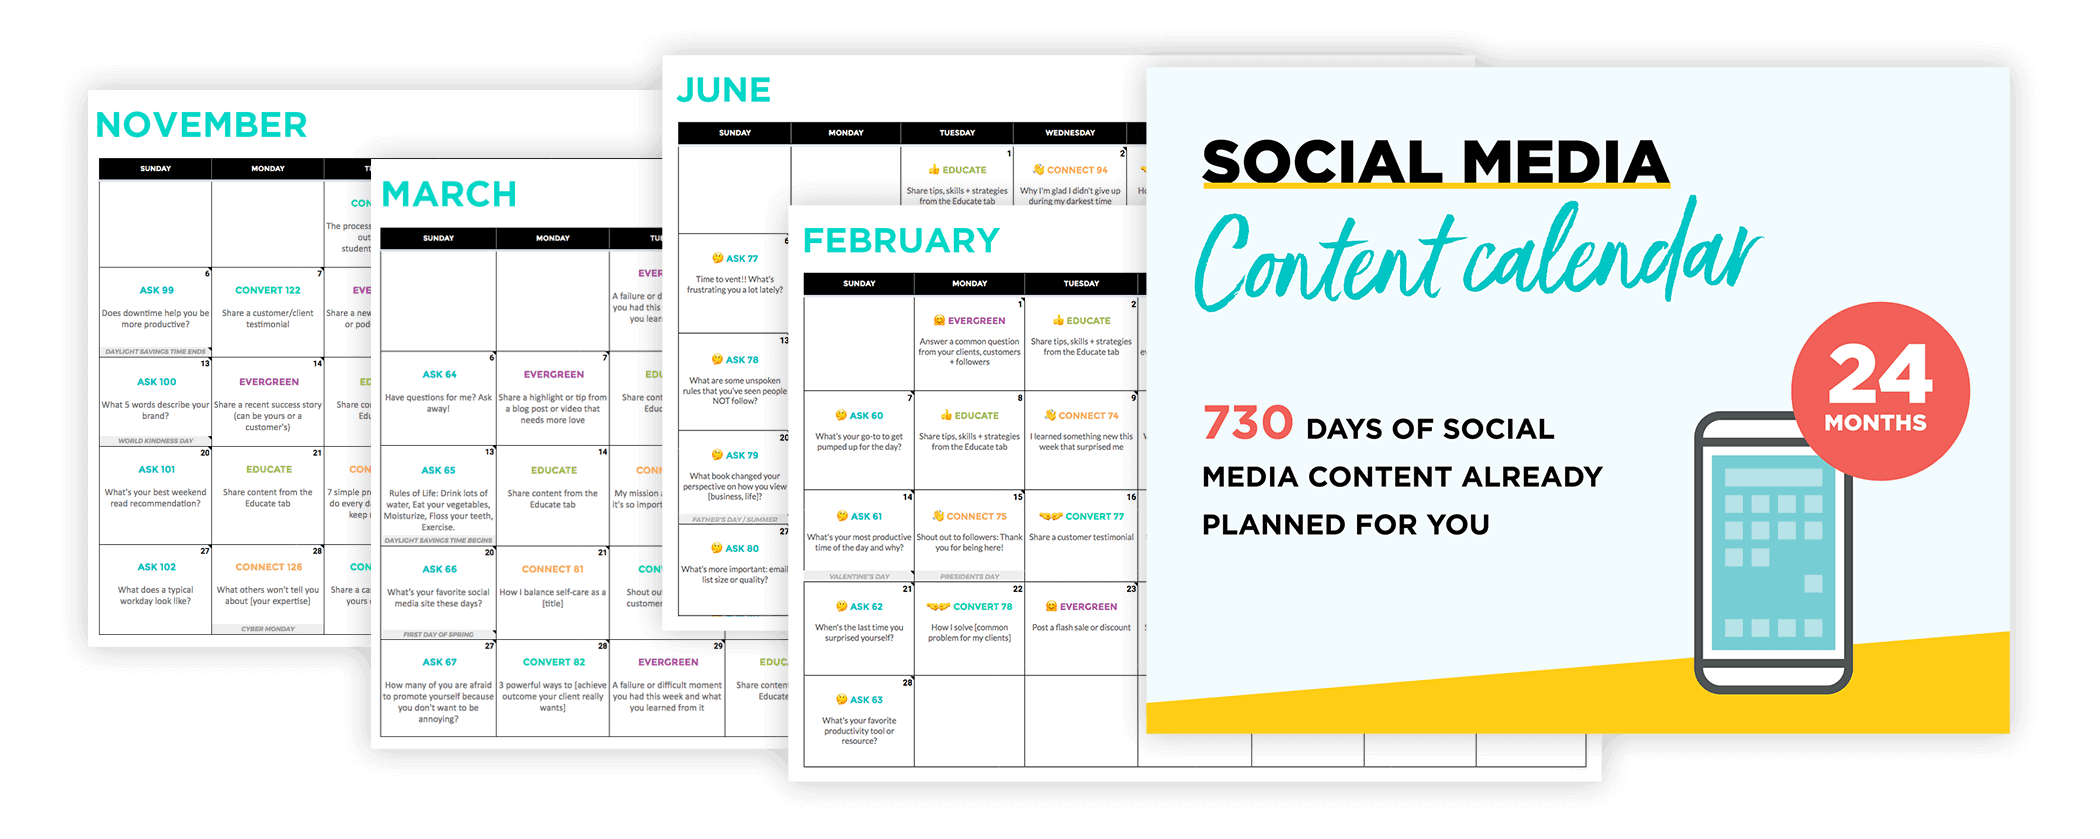 Content Calendar by ConversionMinded